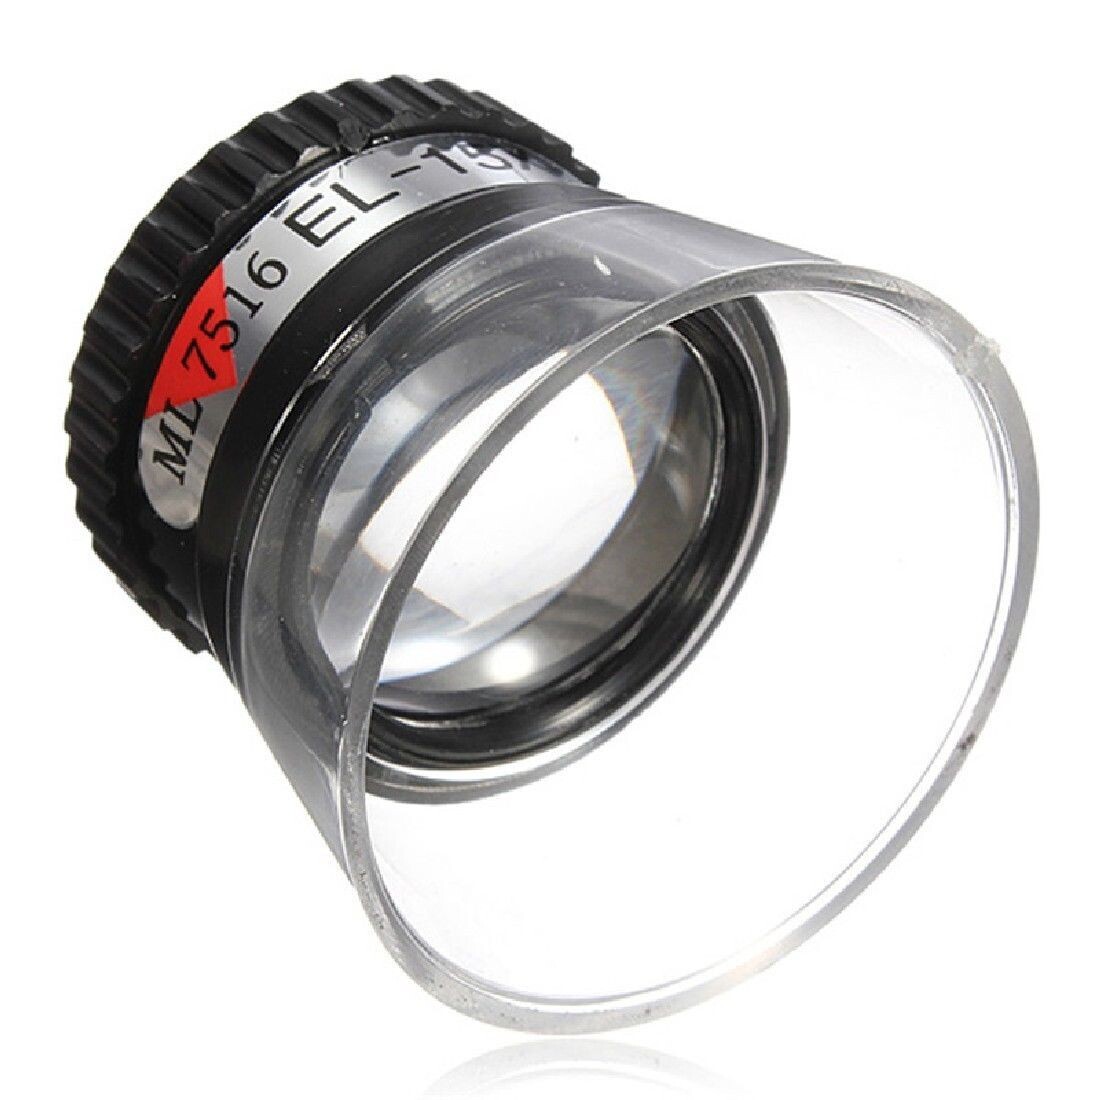 Cylinder Jewellers Loupe Magnifying Eye Glass Coin Magnifier Monocular Monocle Magnification x 15